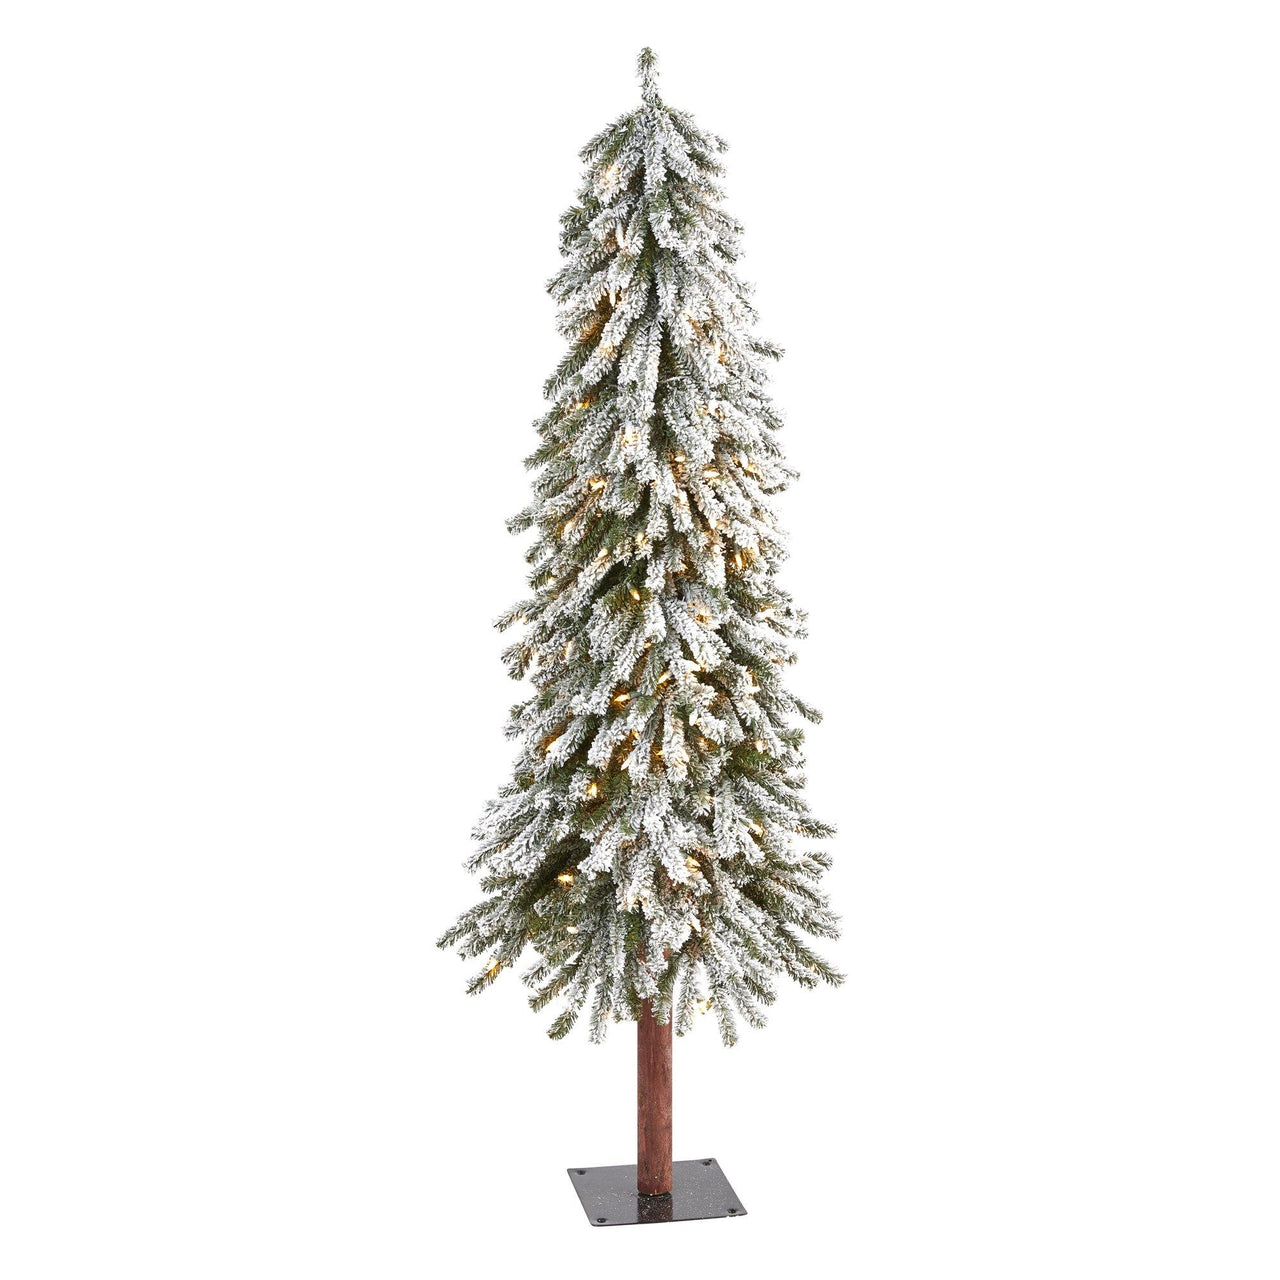 5’ Flocked Grand Alpine Artificial Christmas Tree with 200 Clear Lights and 469 Bendable Branches on Natural Trunk